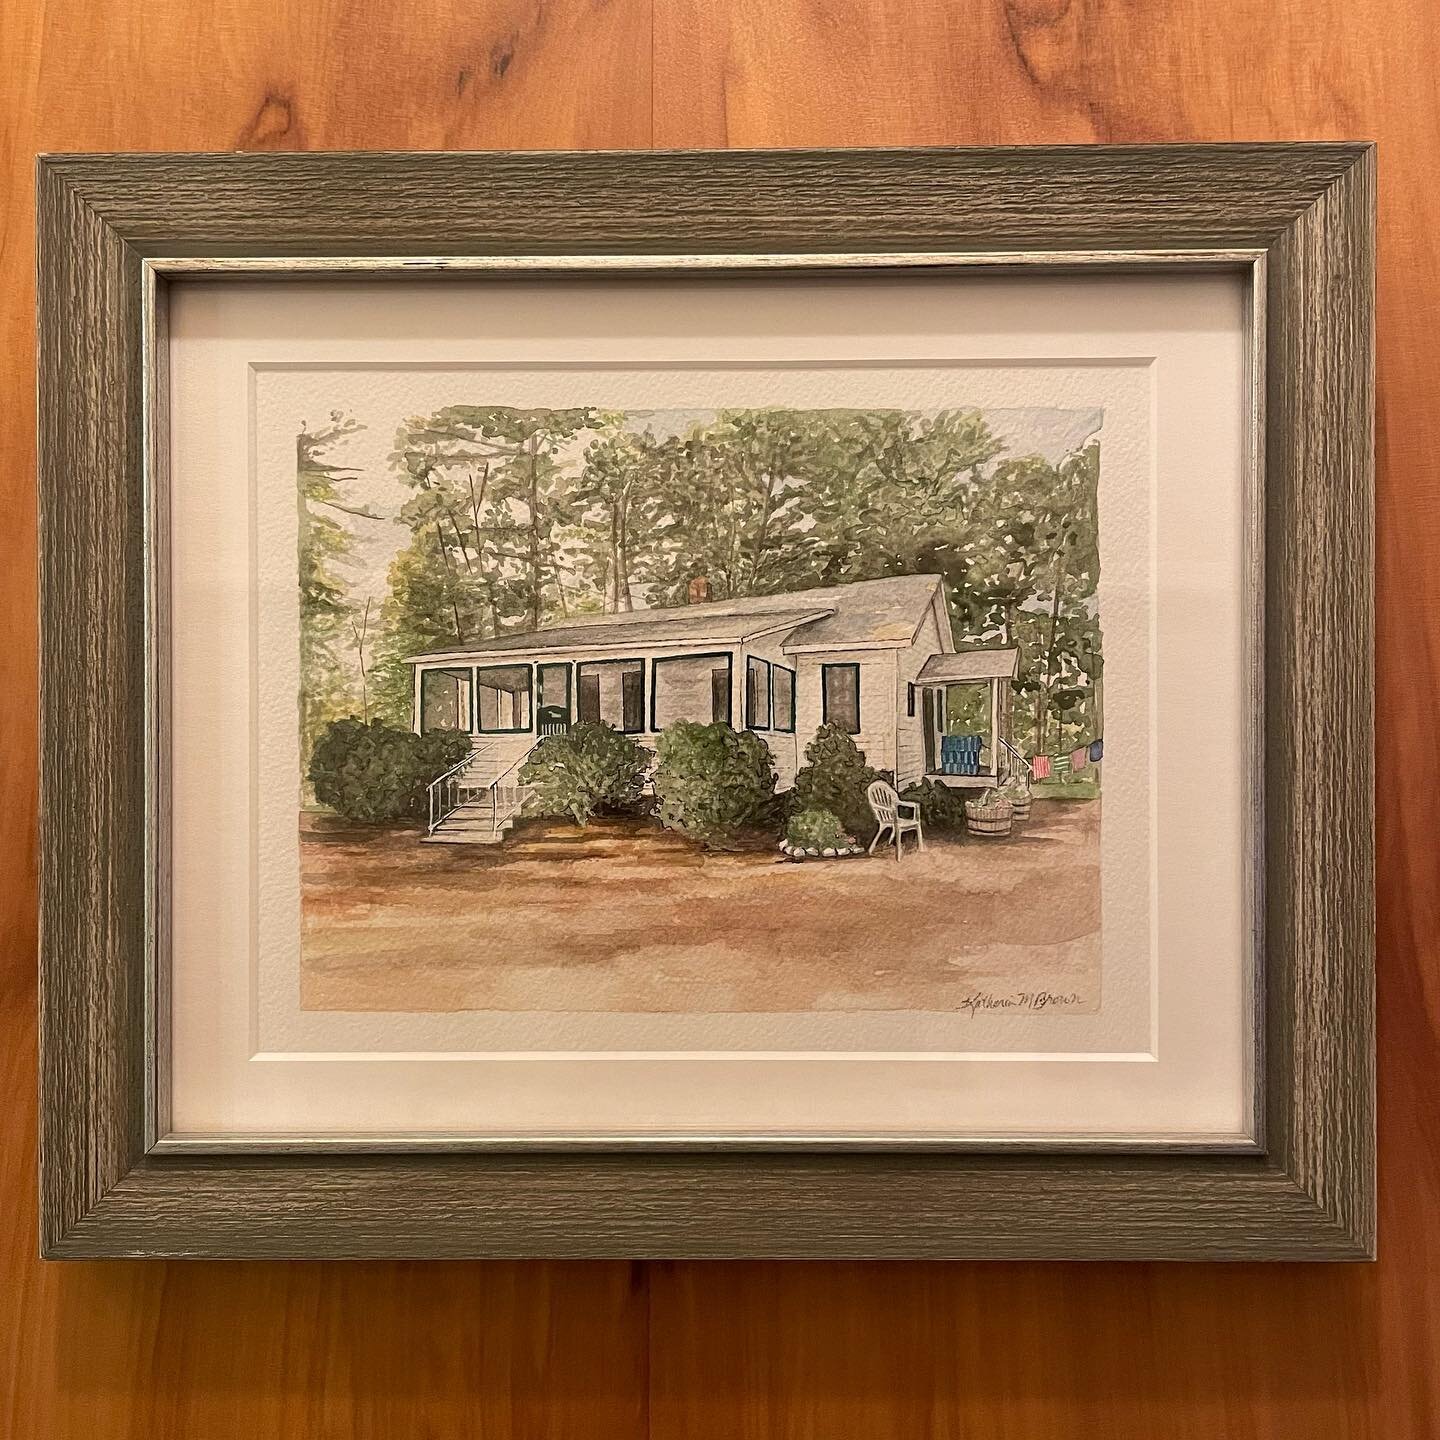 I made this for my sister and brother in-law who were married at her family&rsquo;s generation-old cottage in Maine last summer. They are in Boulder, so I hope this painting reminds them of this special place every time they walk by it!
.
.
Thanks to